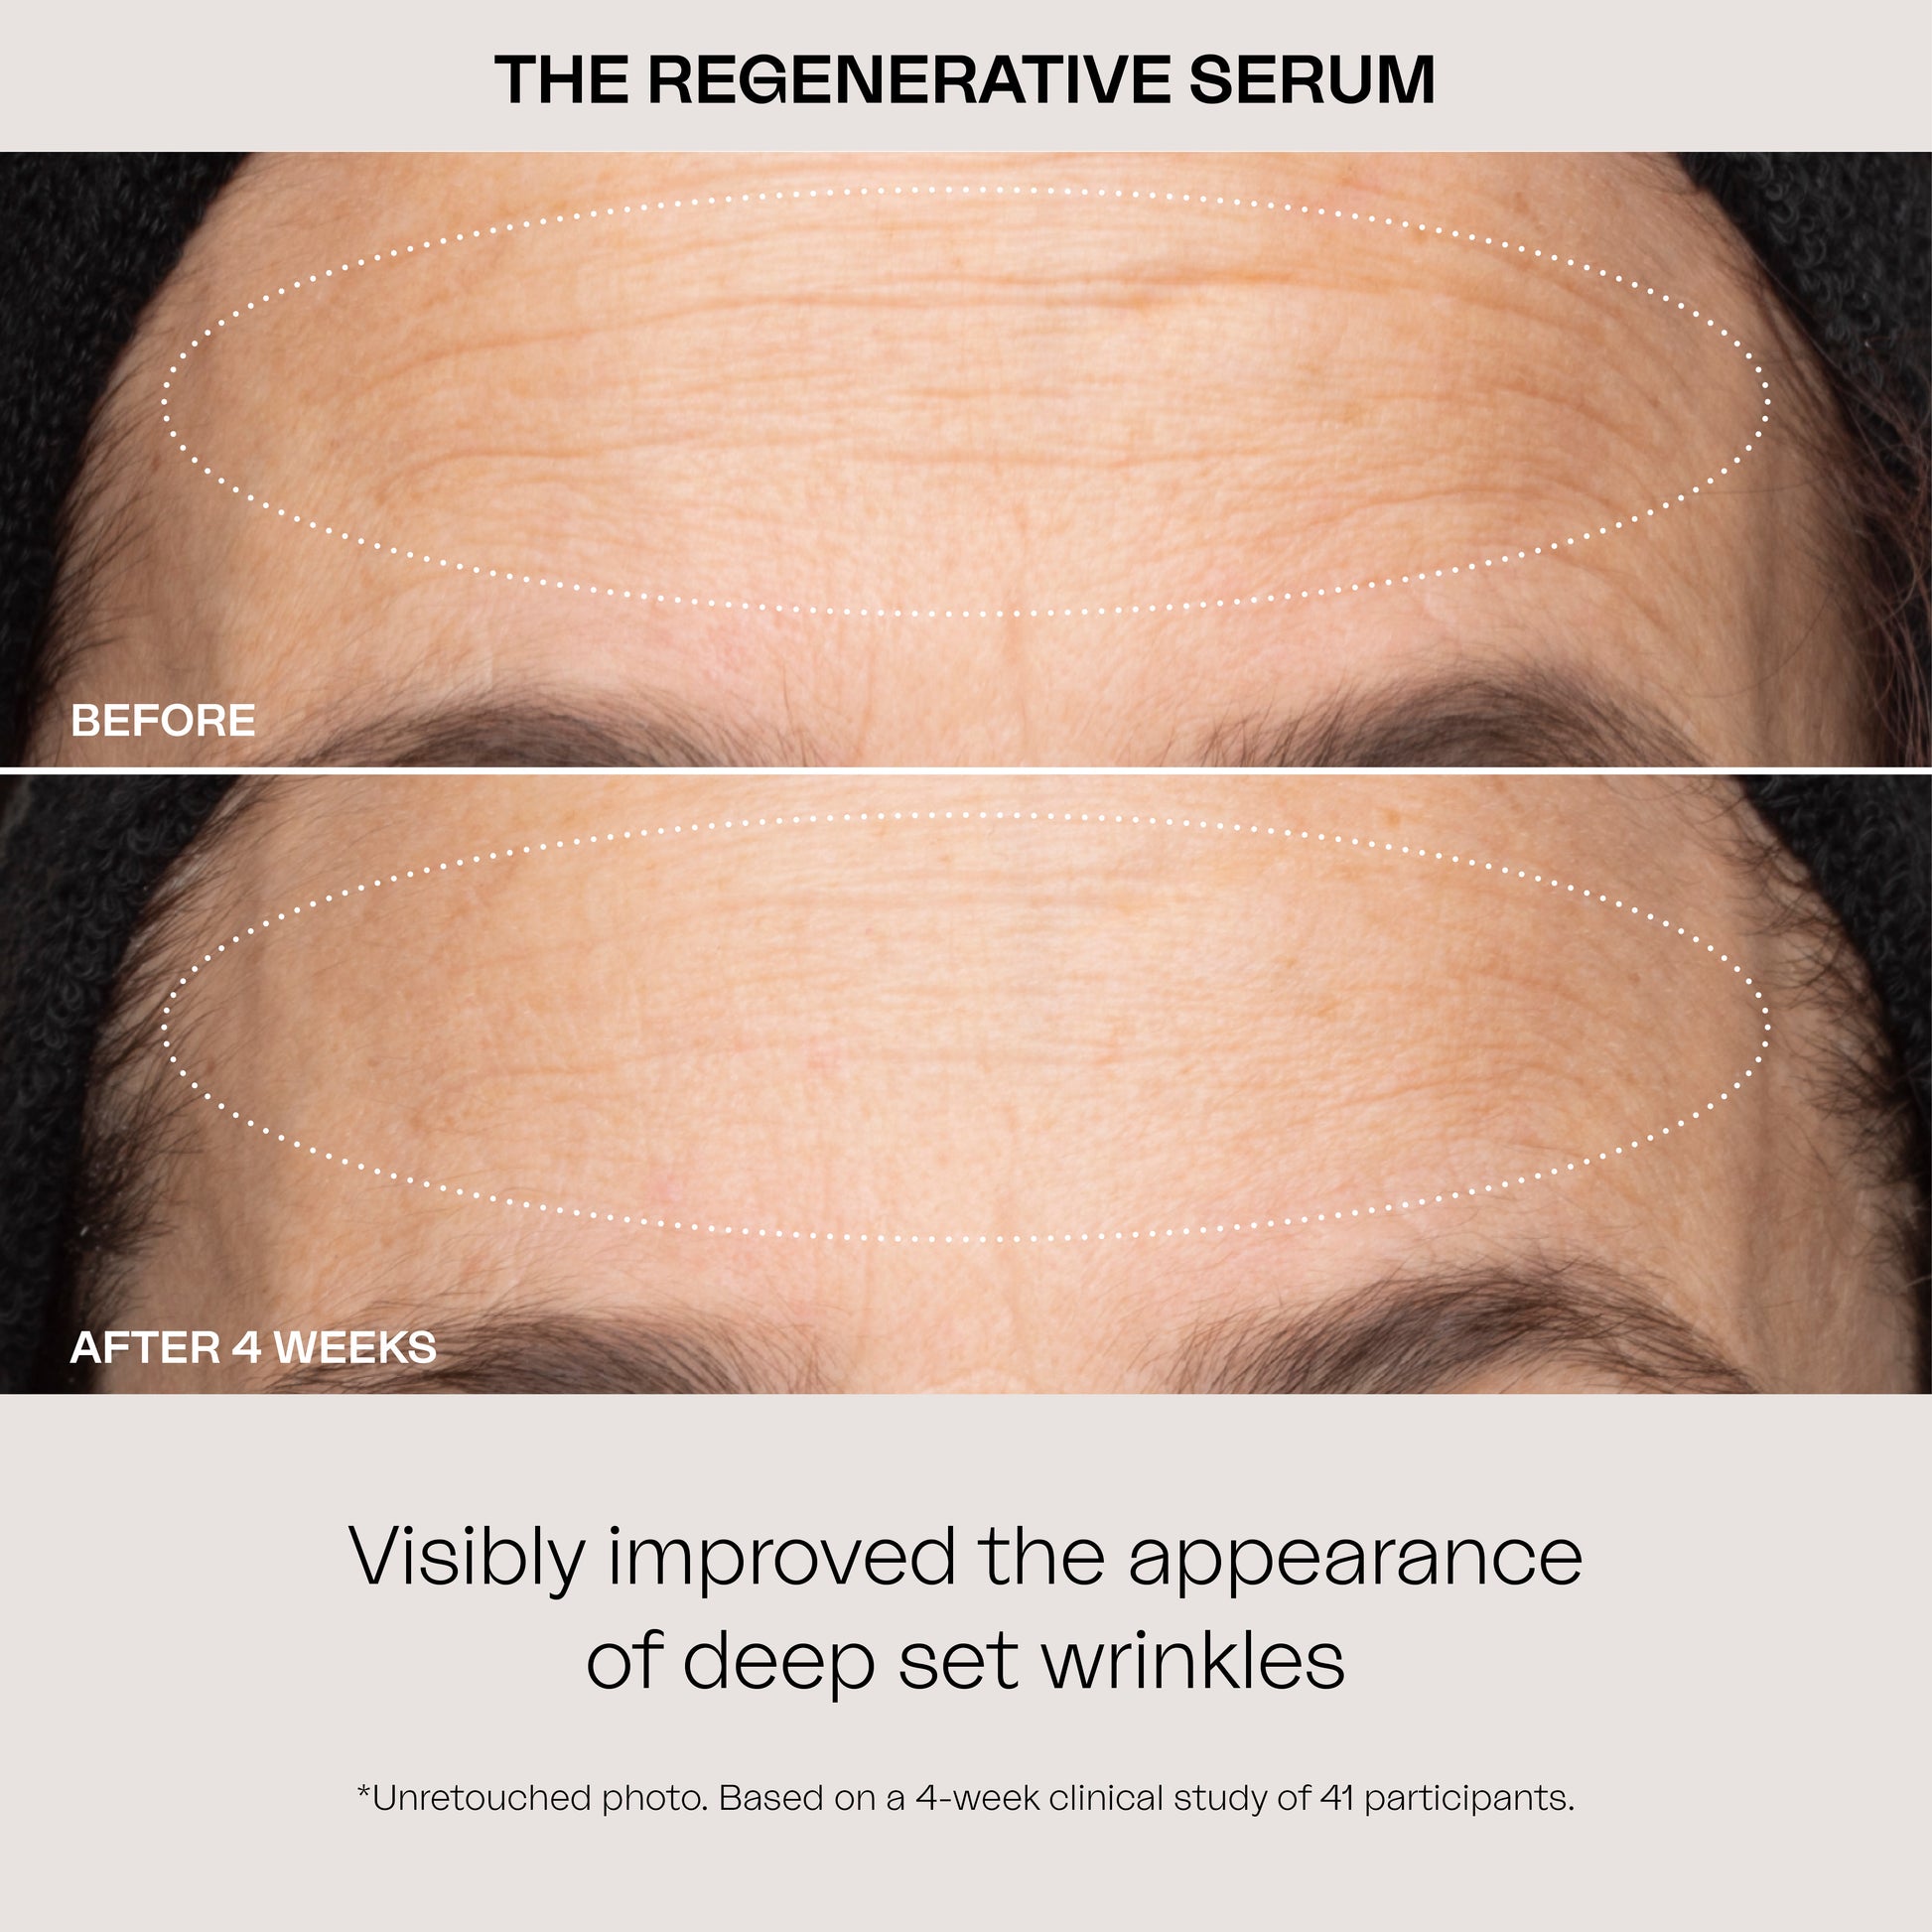 Eighth Day Skin's Regenerative Serum visibly improved the appearance of deep set wrinkles. Unretouched photo. Based on a clinical study of 41 participants.